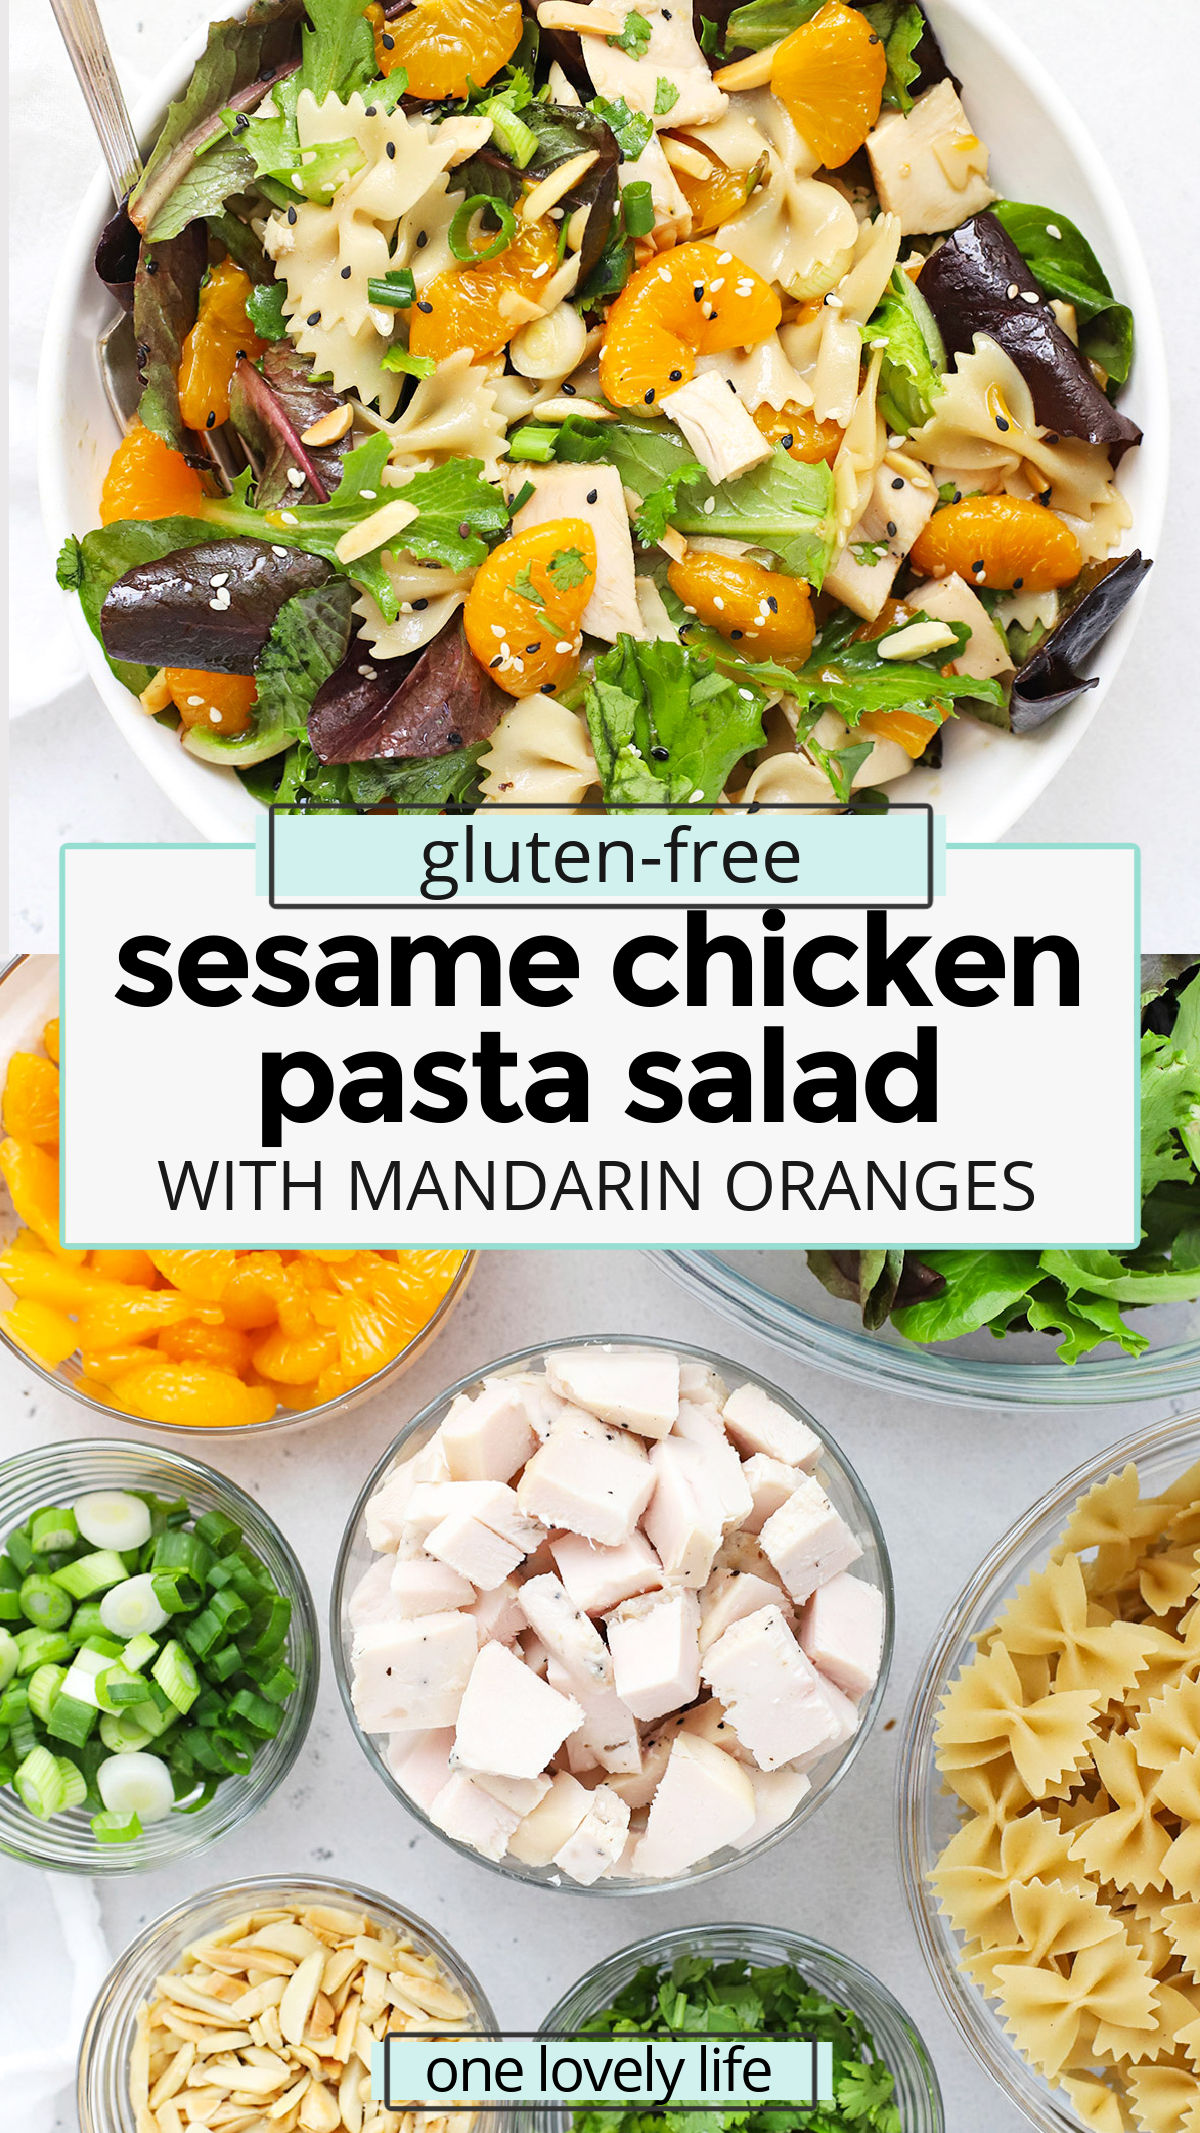 Sesame Chicken Pasta Salad - Sesame pasta salad with mandarin oranges & a tangy Asian-inspired dressing make this the perfect summer recipe! (Gluten-Free or Not) / gluten-free pasta salad recipe / chicken pasta salad recipe / summer salad // easy pasta salad / asian pasta salad / mandarin pasta salad / gluten-free BBQ side dish / gluten-free potluck recipe / dinner salad / gluten-free pasta // pasta salad no mayo / pasta salad without mayo / pasta salad with vinaigrette / pasta salad dressing